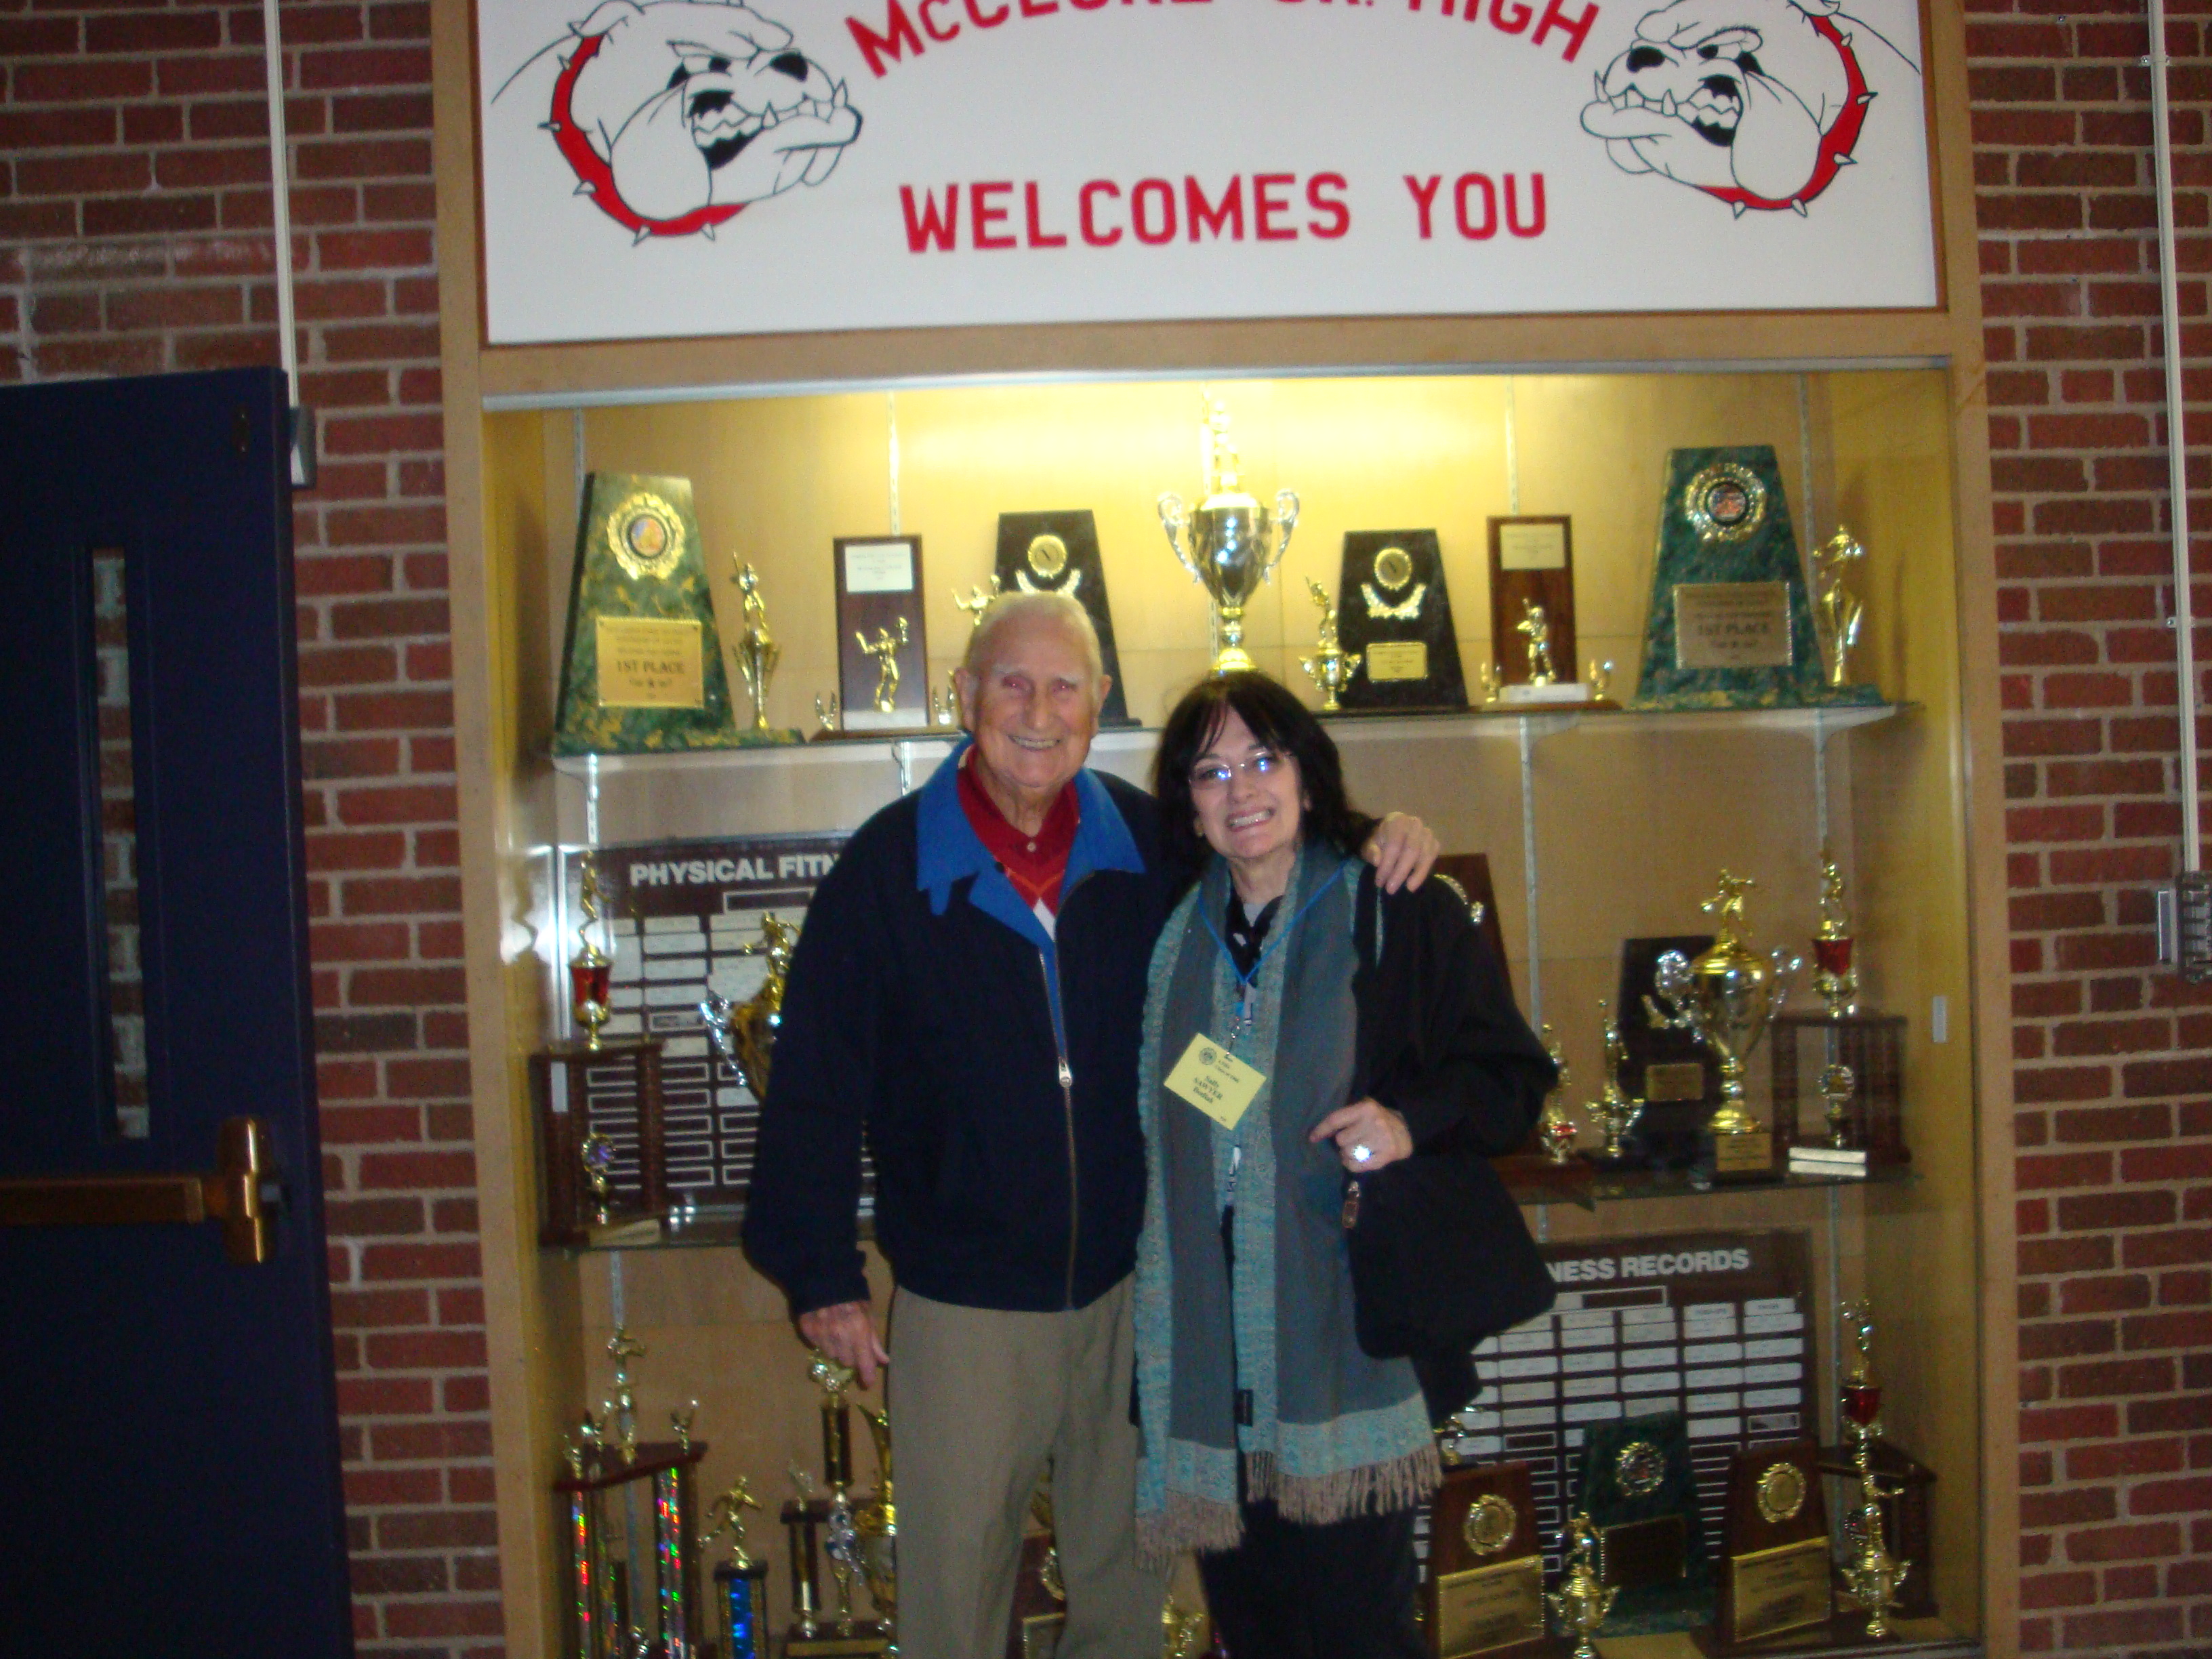  - Coach Stelmack and Sally Sawyer at McClure